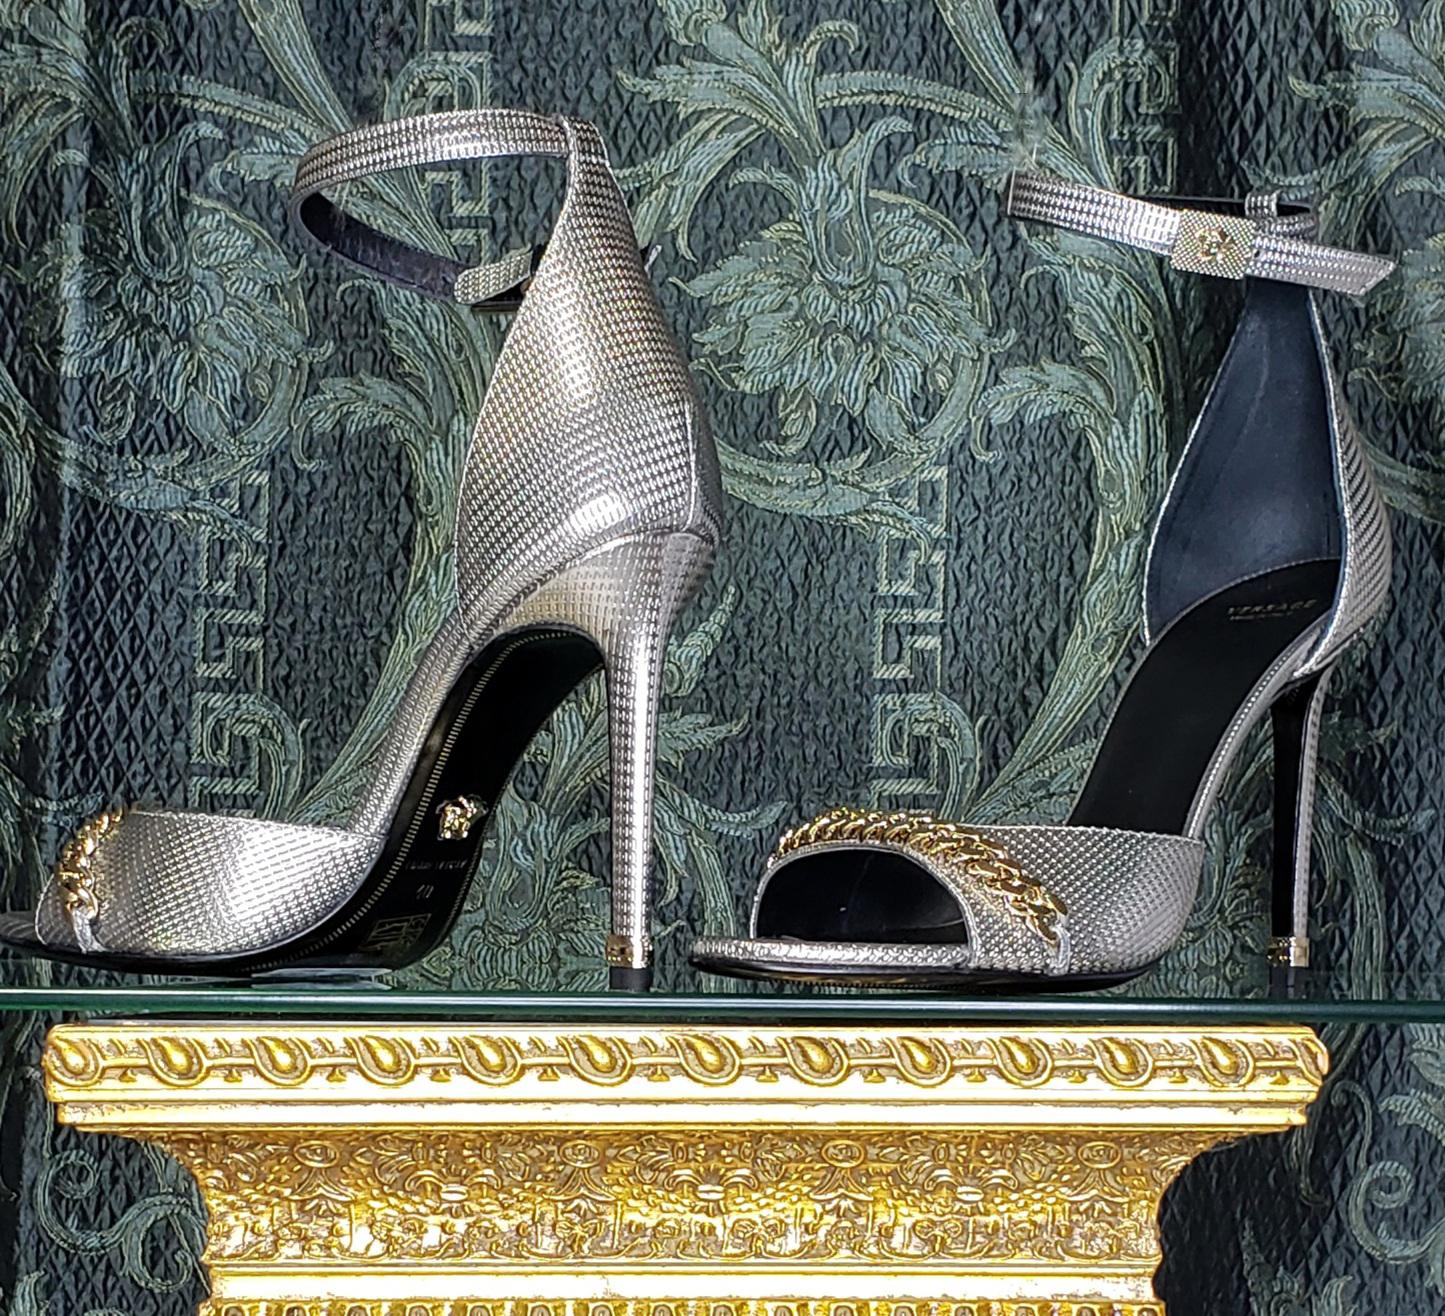 versace silver shoes